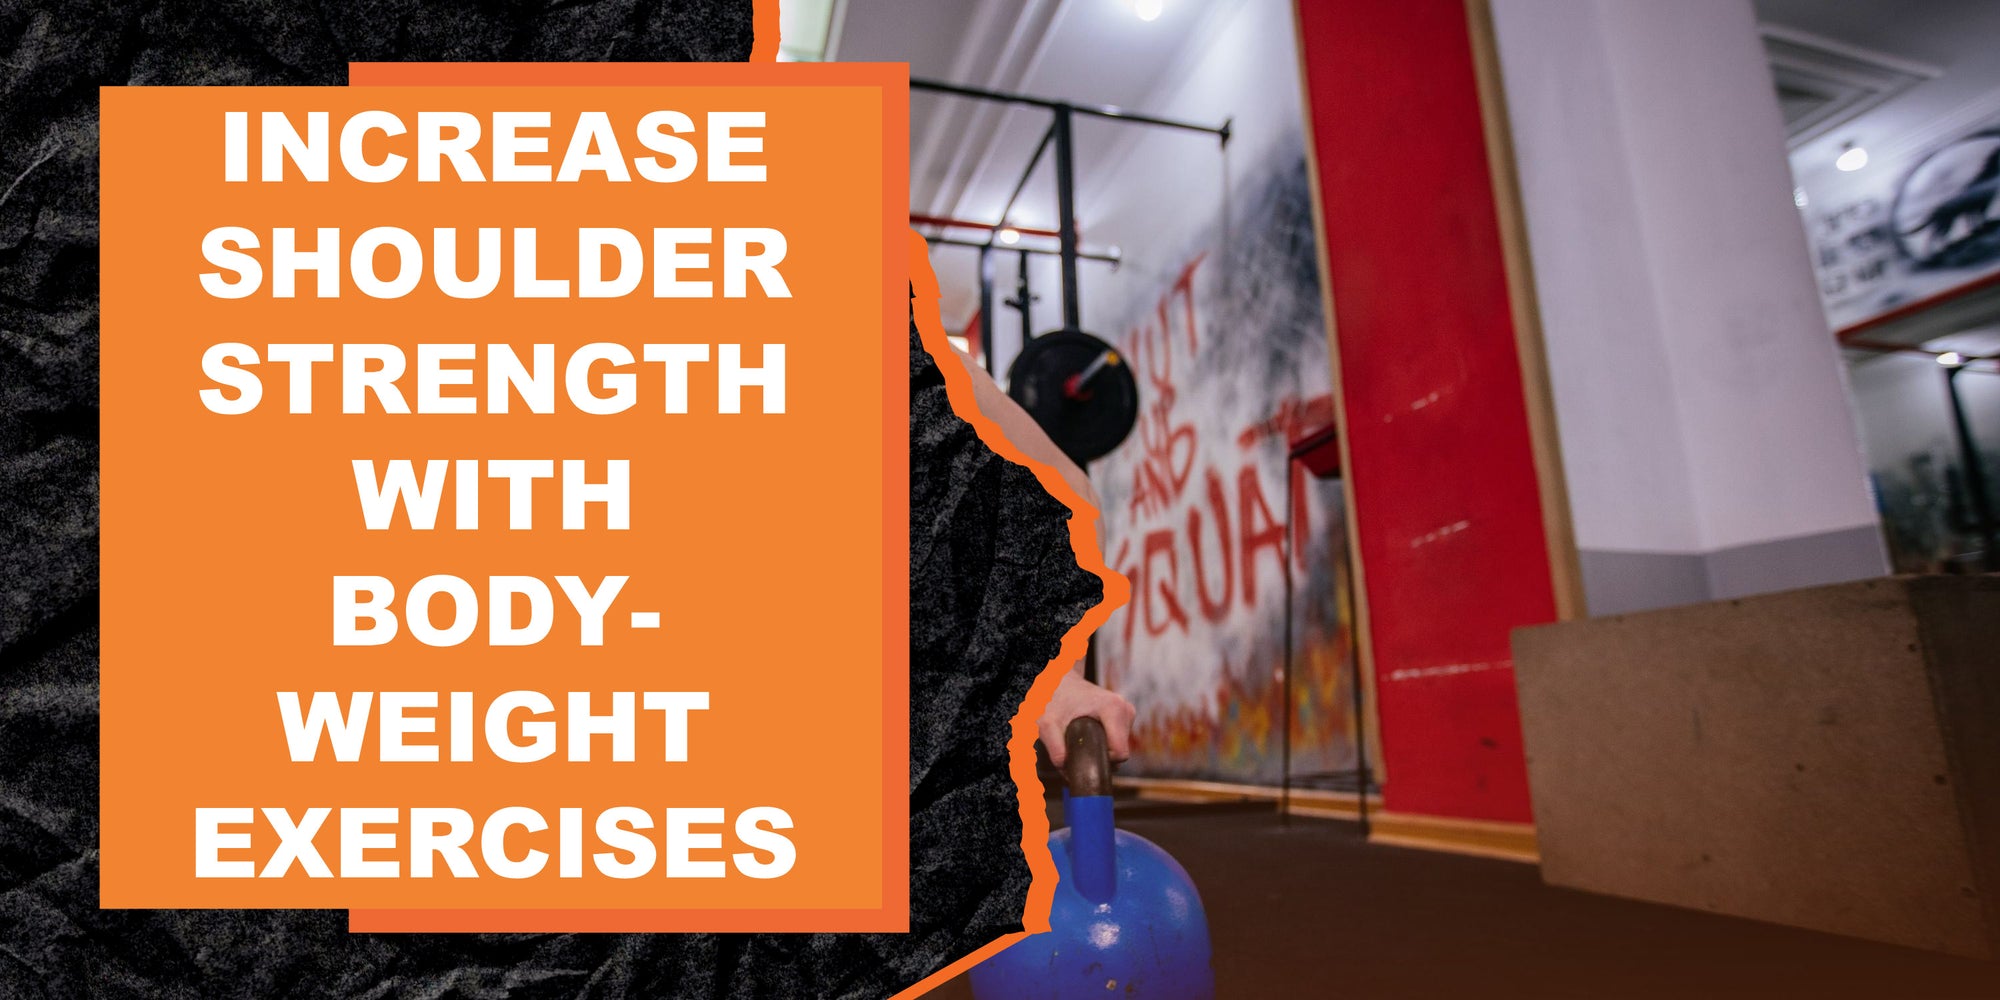 Increase Shoulder Strength with Bodyweight Exercises